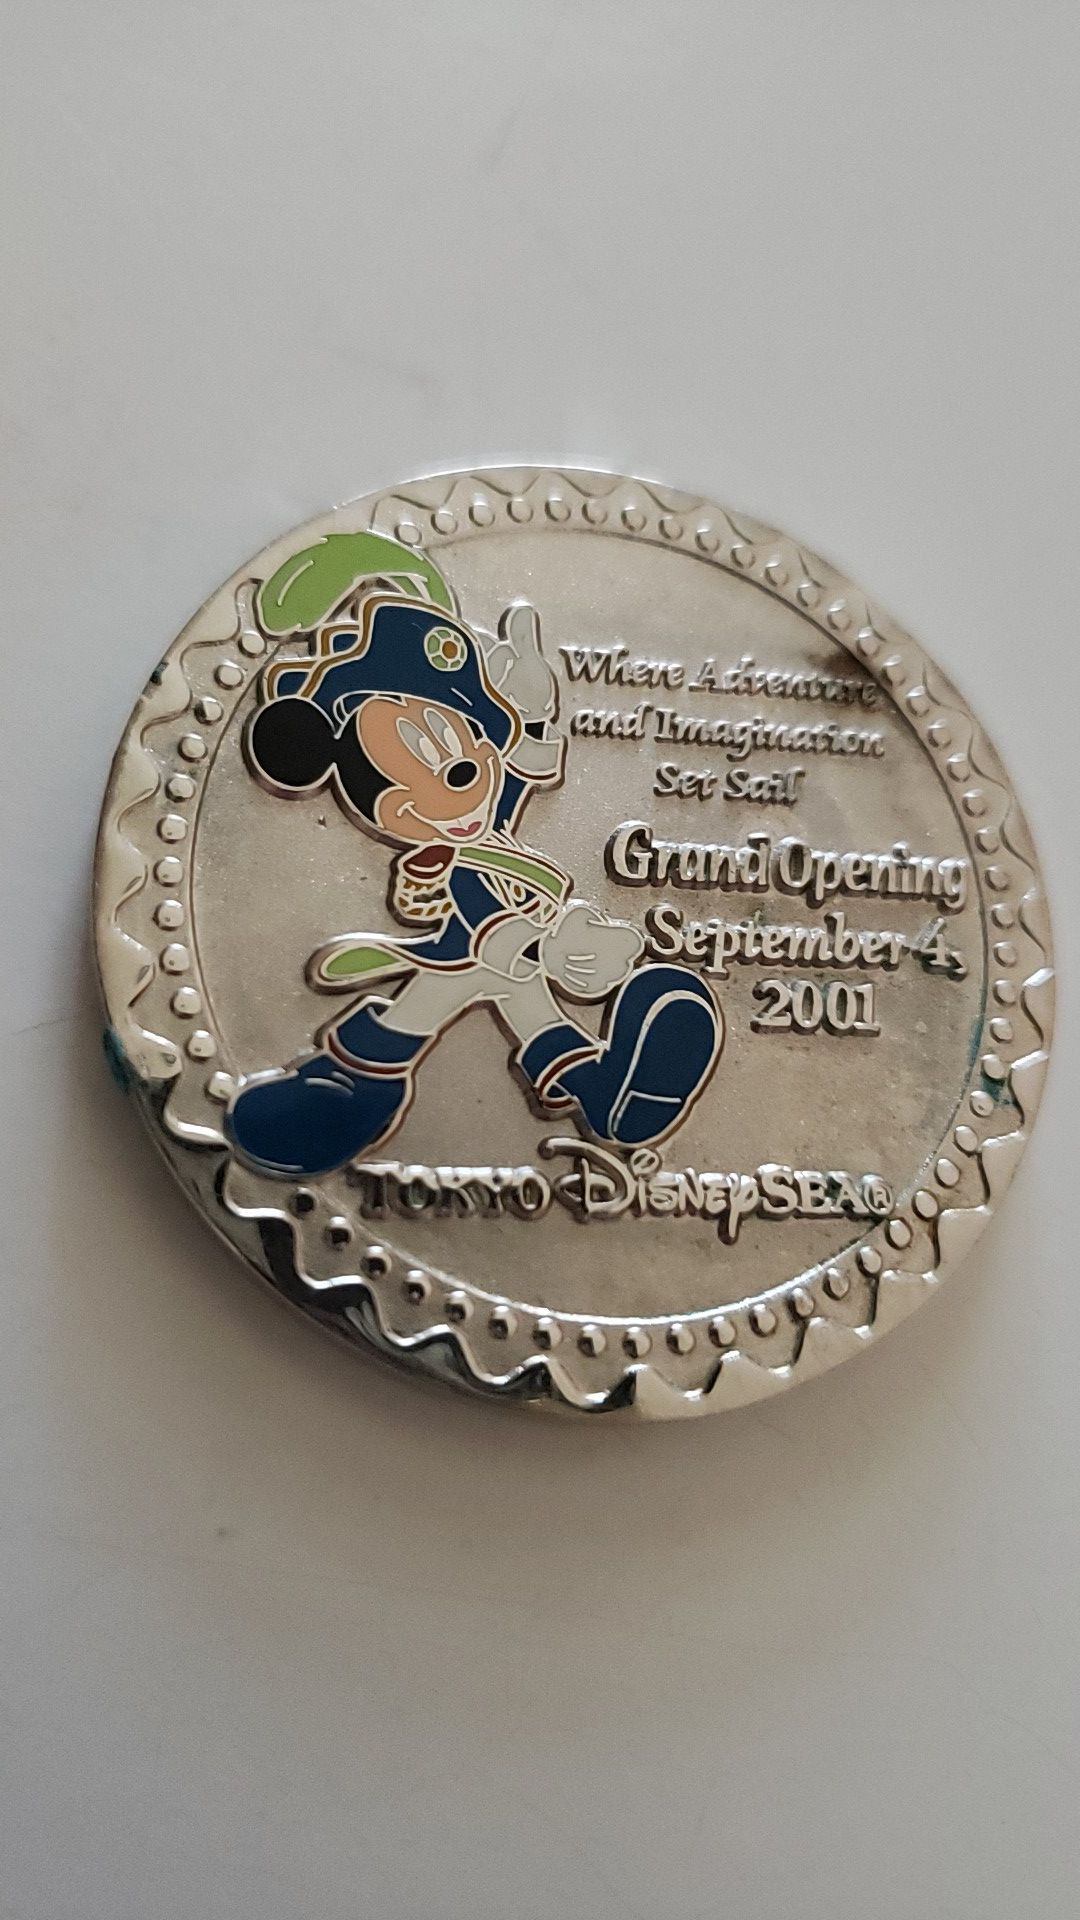 Disney coin limited